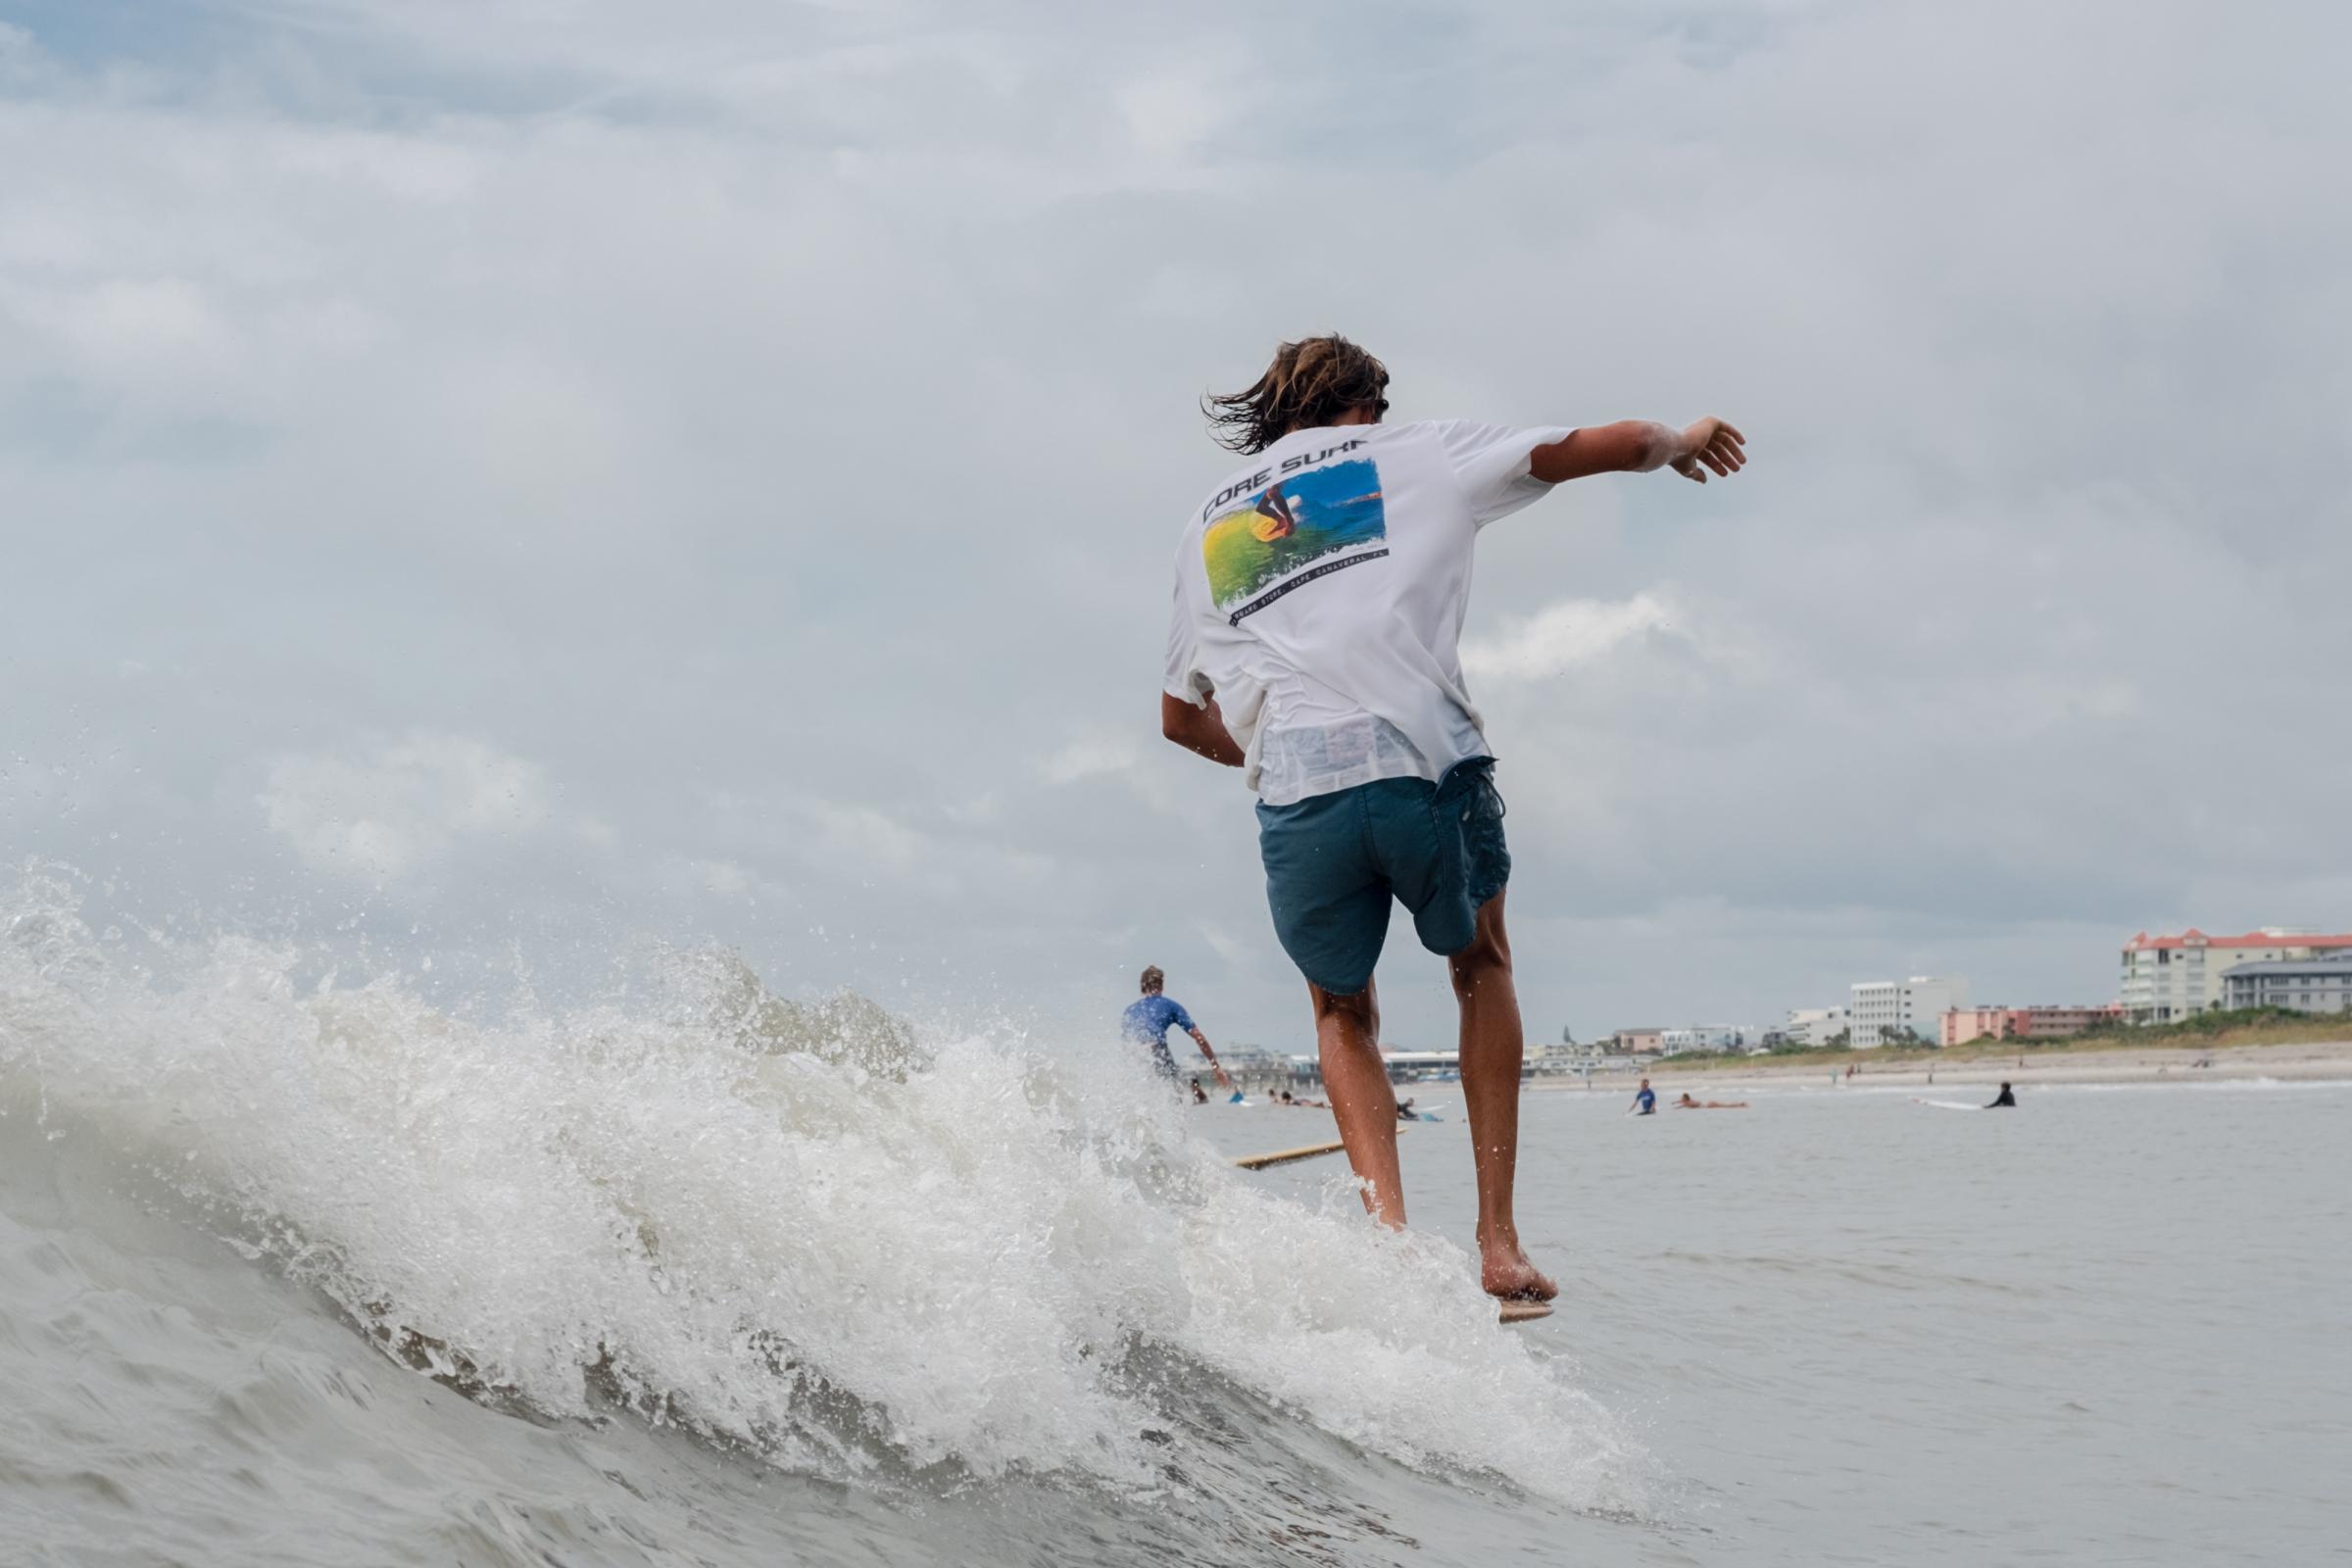 Cape Canaveral, FL. Hotdogzonastix Surf Contest July 2021 -  Skye Blumenfeld with toes on the nose on a 1960s...